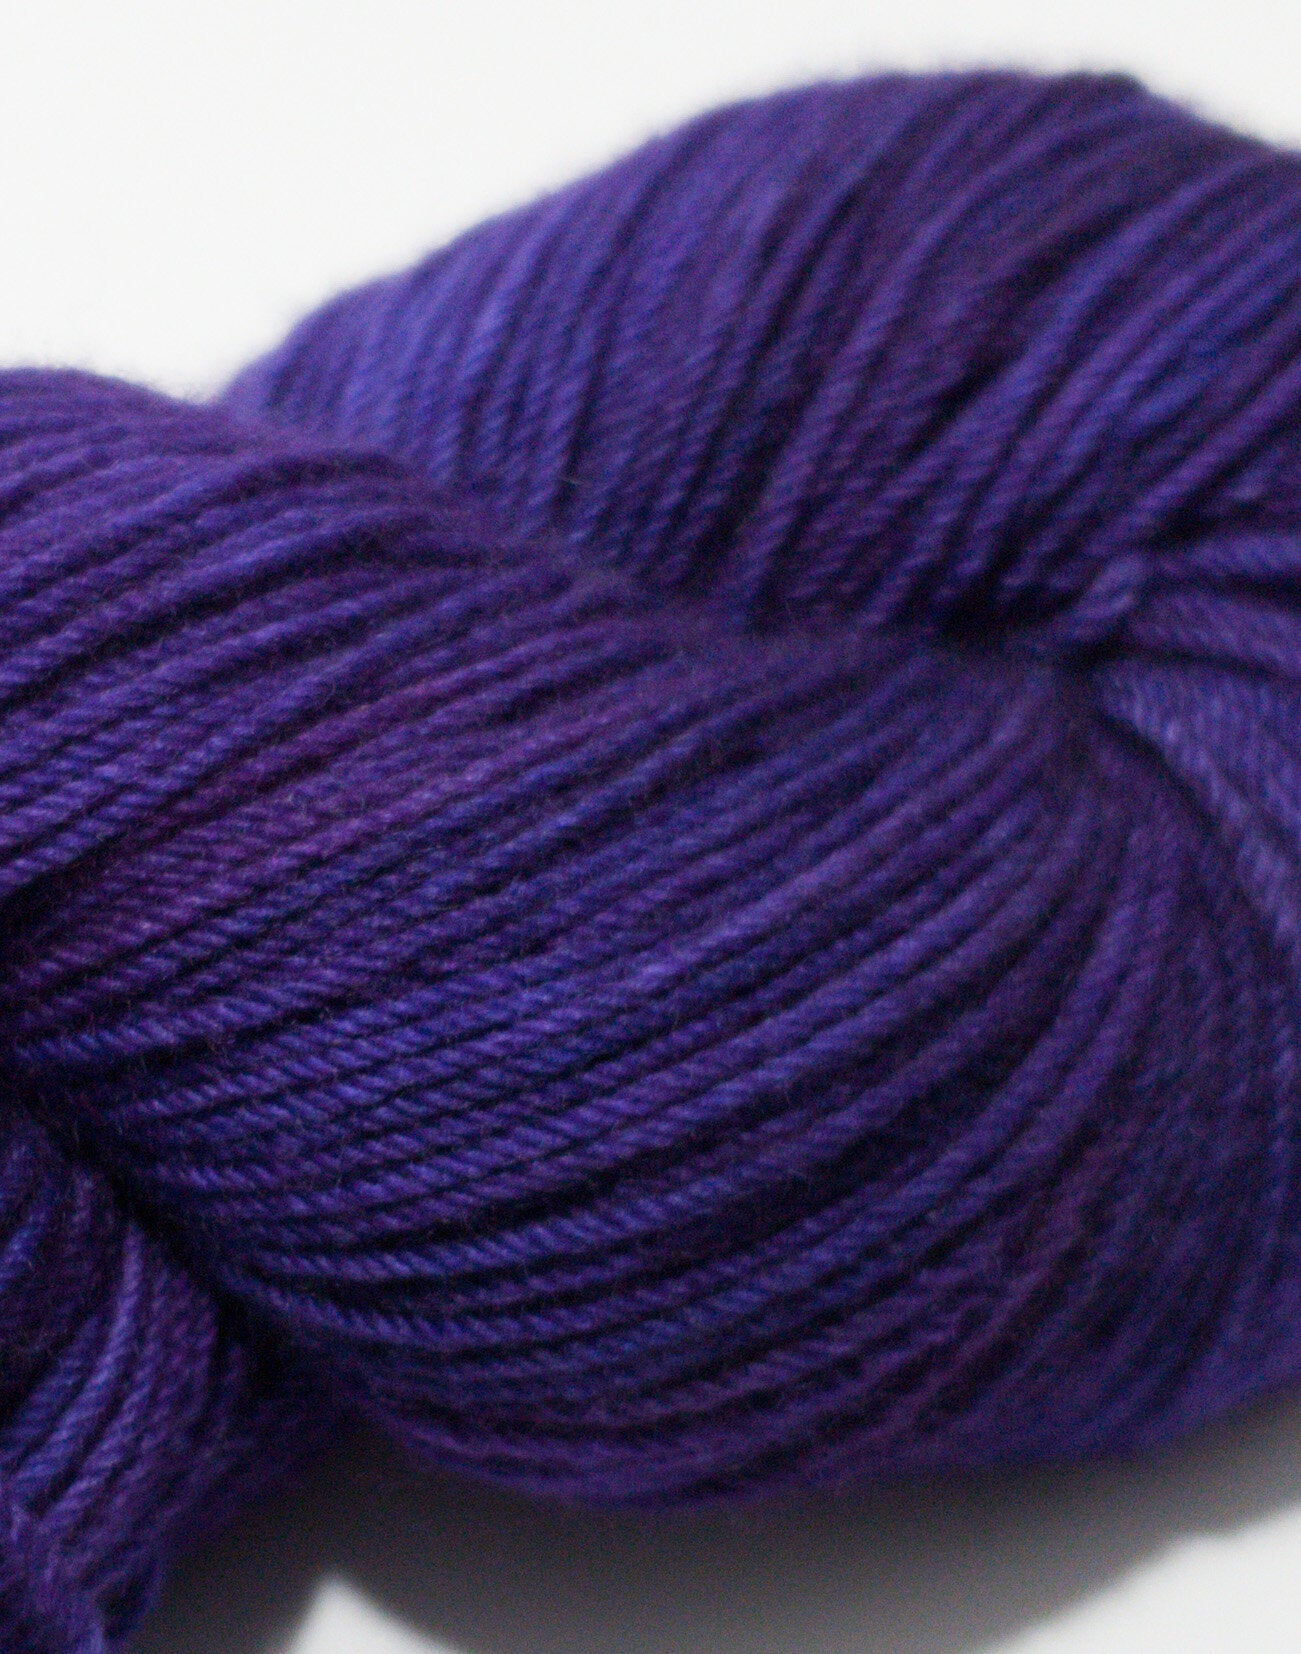 The Yarn formerly known as Prince- 100% Merino